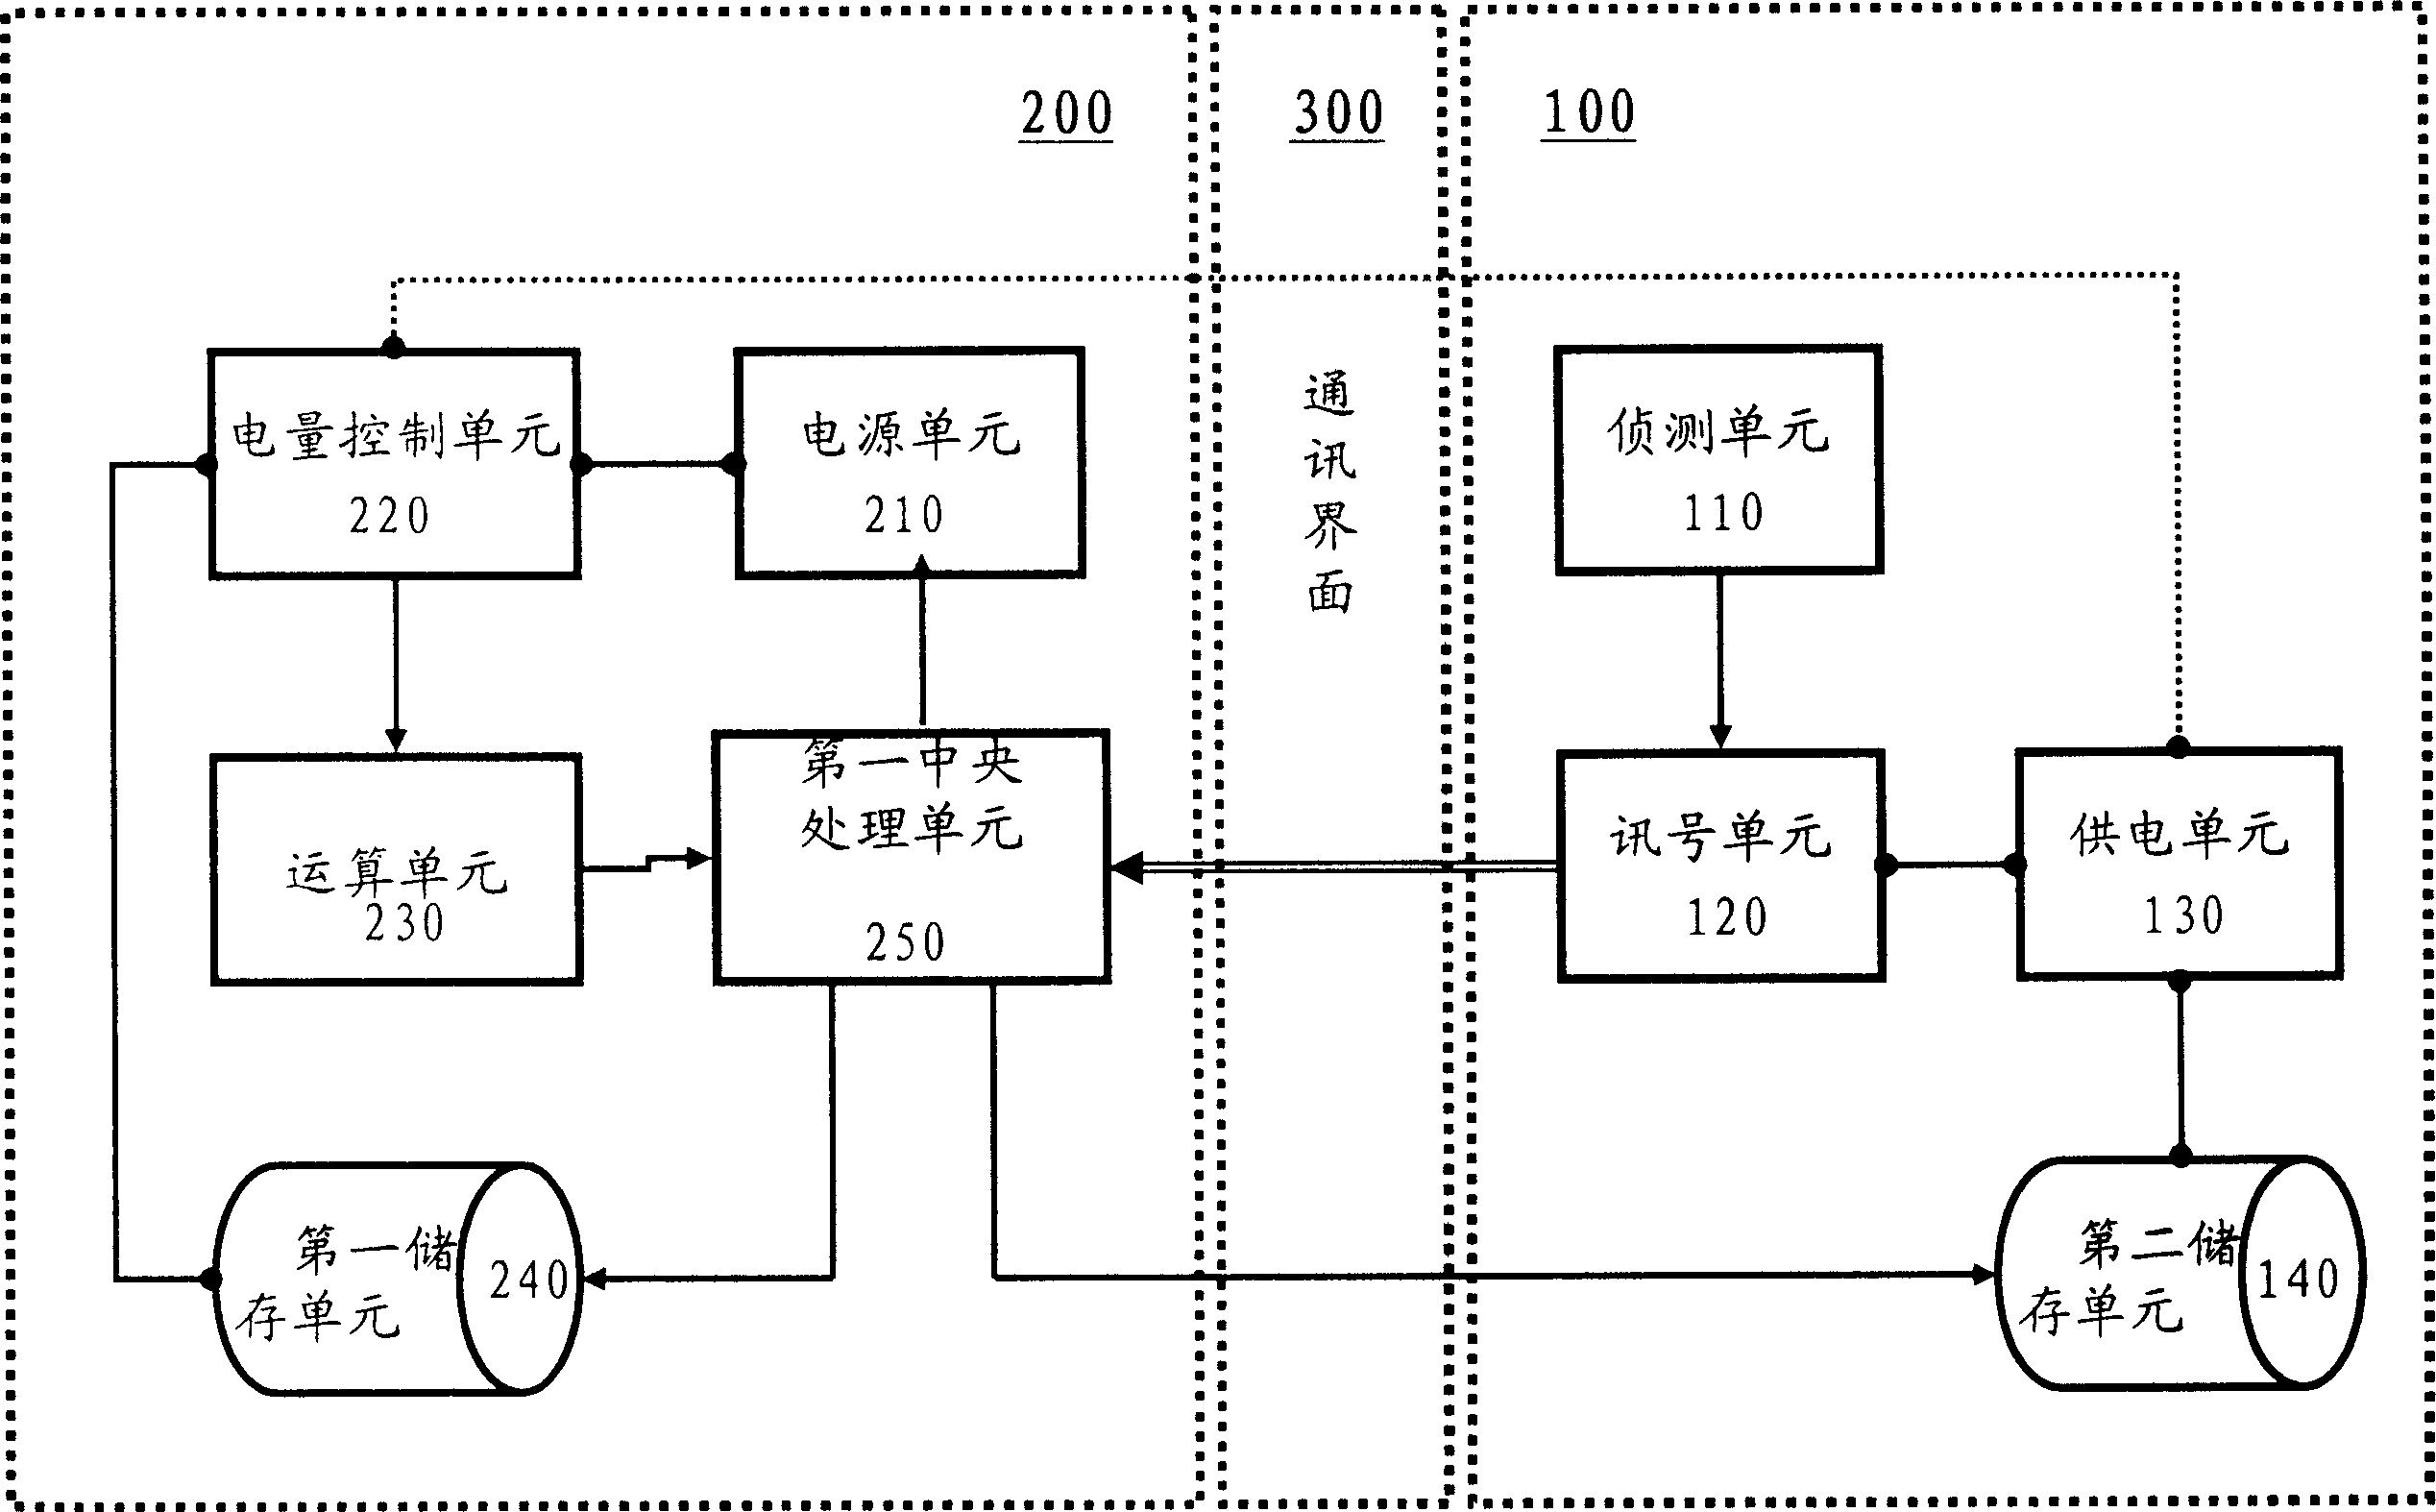 Protection mechanism using external connecting device for information processor and method thereof